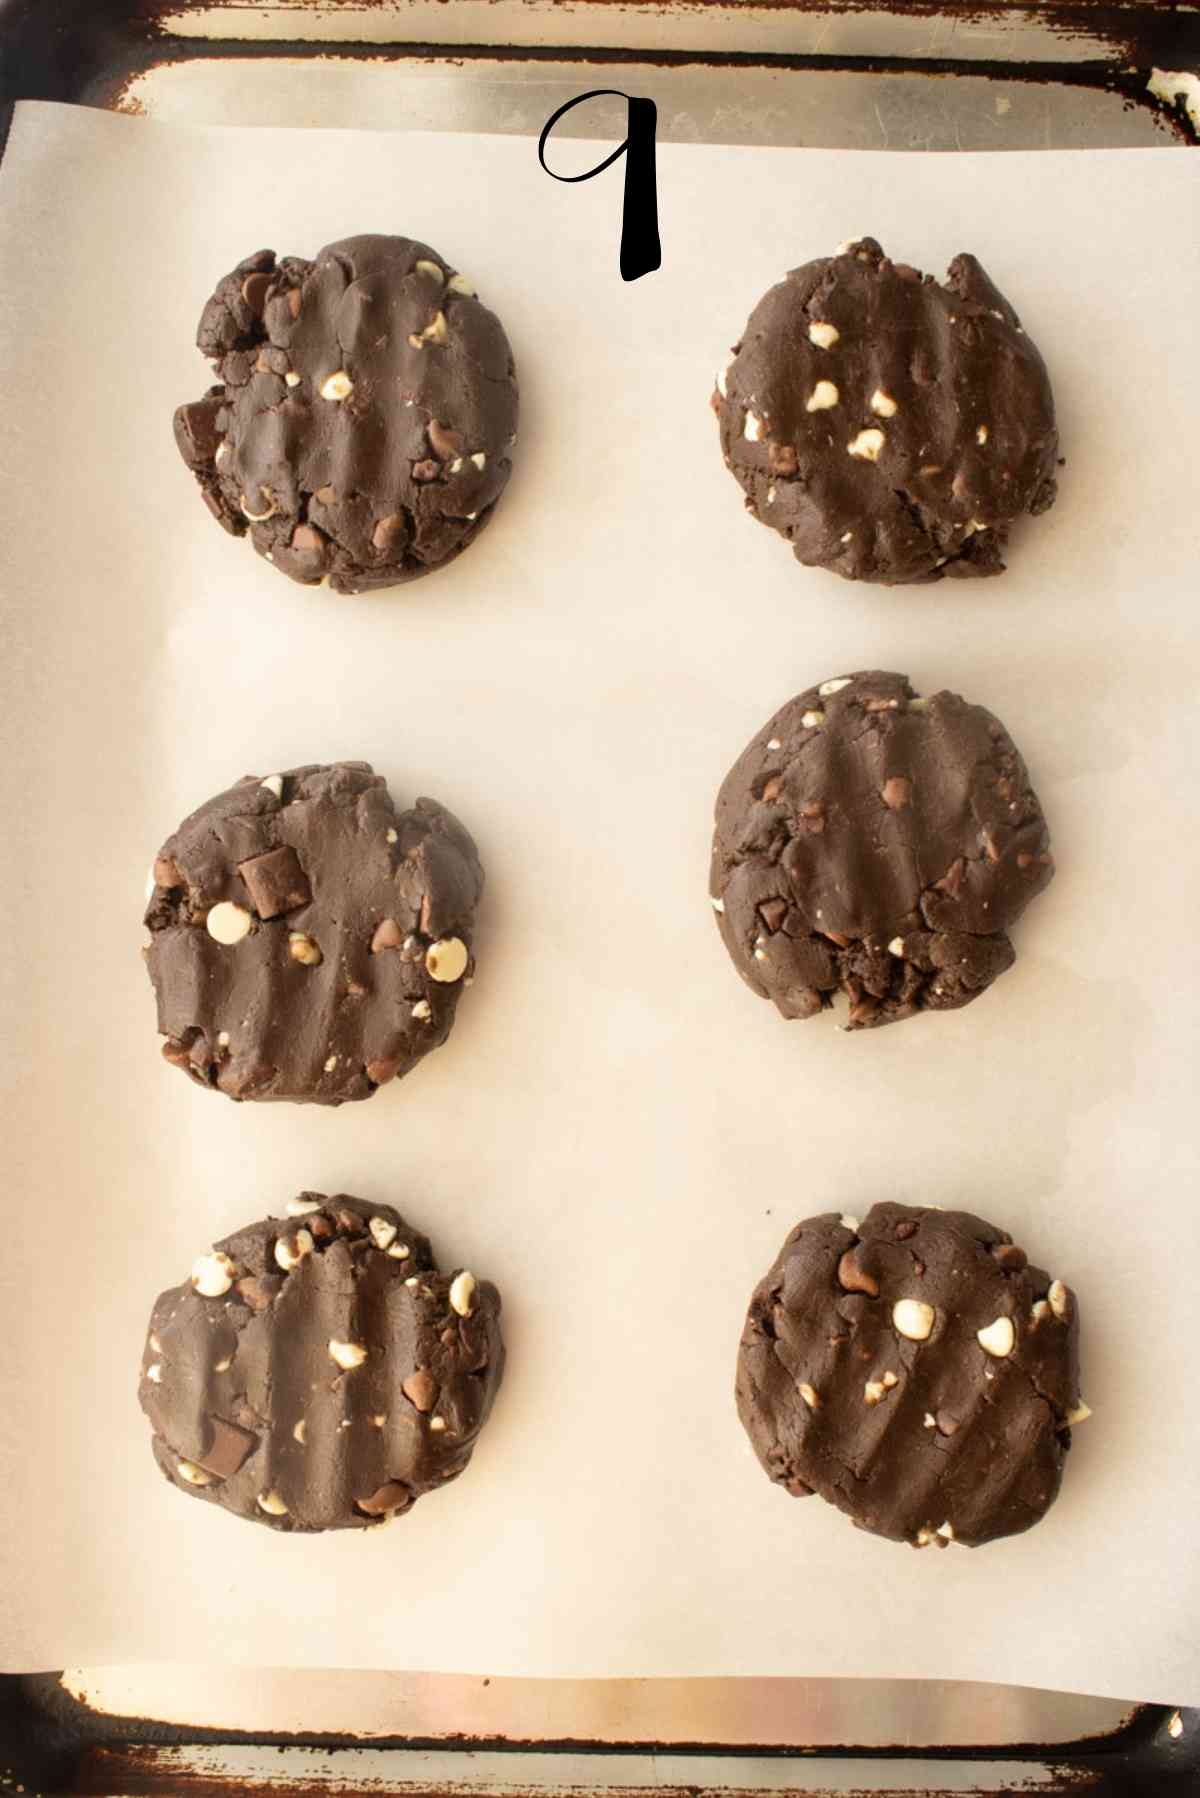 Check out the different kinds of chocolate chips in the unbaked cookies on a prepared baking sheet!